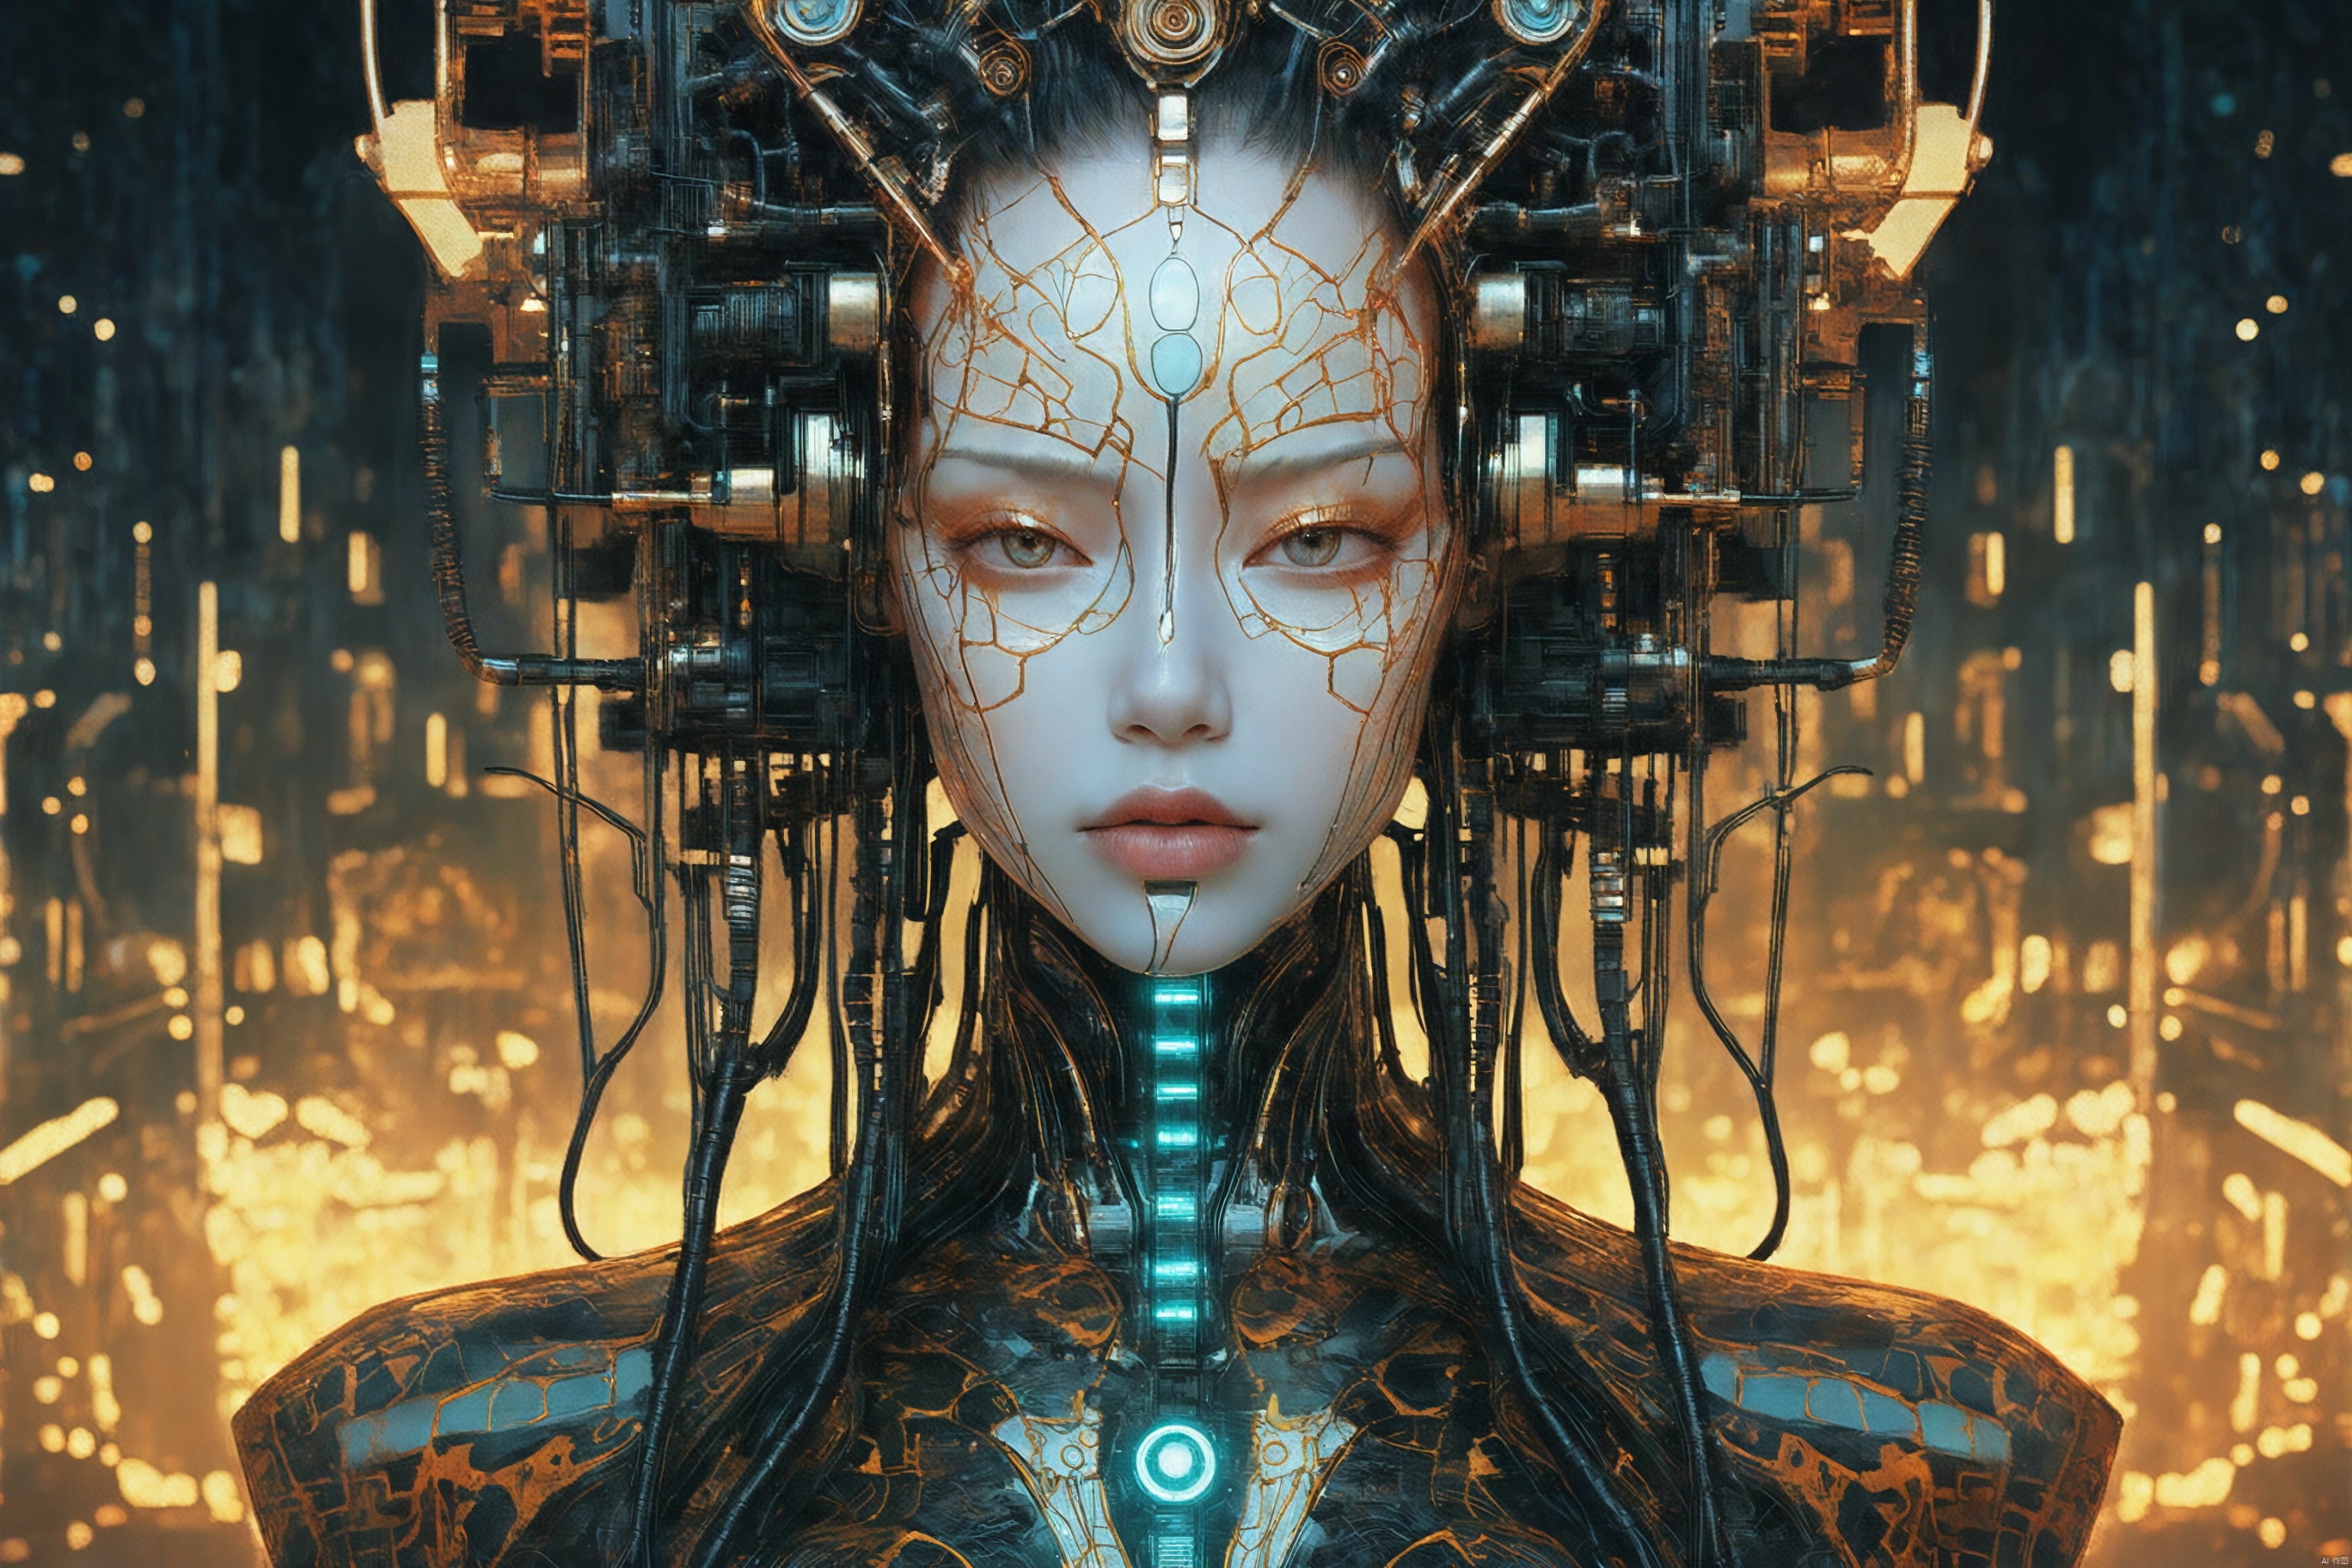  This artwork is a detailed symmetrical portrait of a cyberpunk neural network goddess, made of exquisitely broken, cracked, corroded, and rusted porcelain and illuminated with backlight. It is composed of Victo Ngai and H R. Giger created and rendered using octane. This work is popular on CGsociety and Artstation, very detailed and full of vitality. This is a digital rendering and digital painting. 8k, haze, smoke, backlight, sparks, sparks, flames, contours, in the backdrop of a war zone city destroyed by the end of the world, as they examine artworks, they feel an energy flowing through their cybernetic veins. They are preparing to embark on a new adventure, deciphering the secrets hidden in digital rendering. It holds the key to unlocking the future, where humanity can rise again, where the remnants of their shattered world can be transformed into magnificent things.